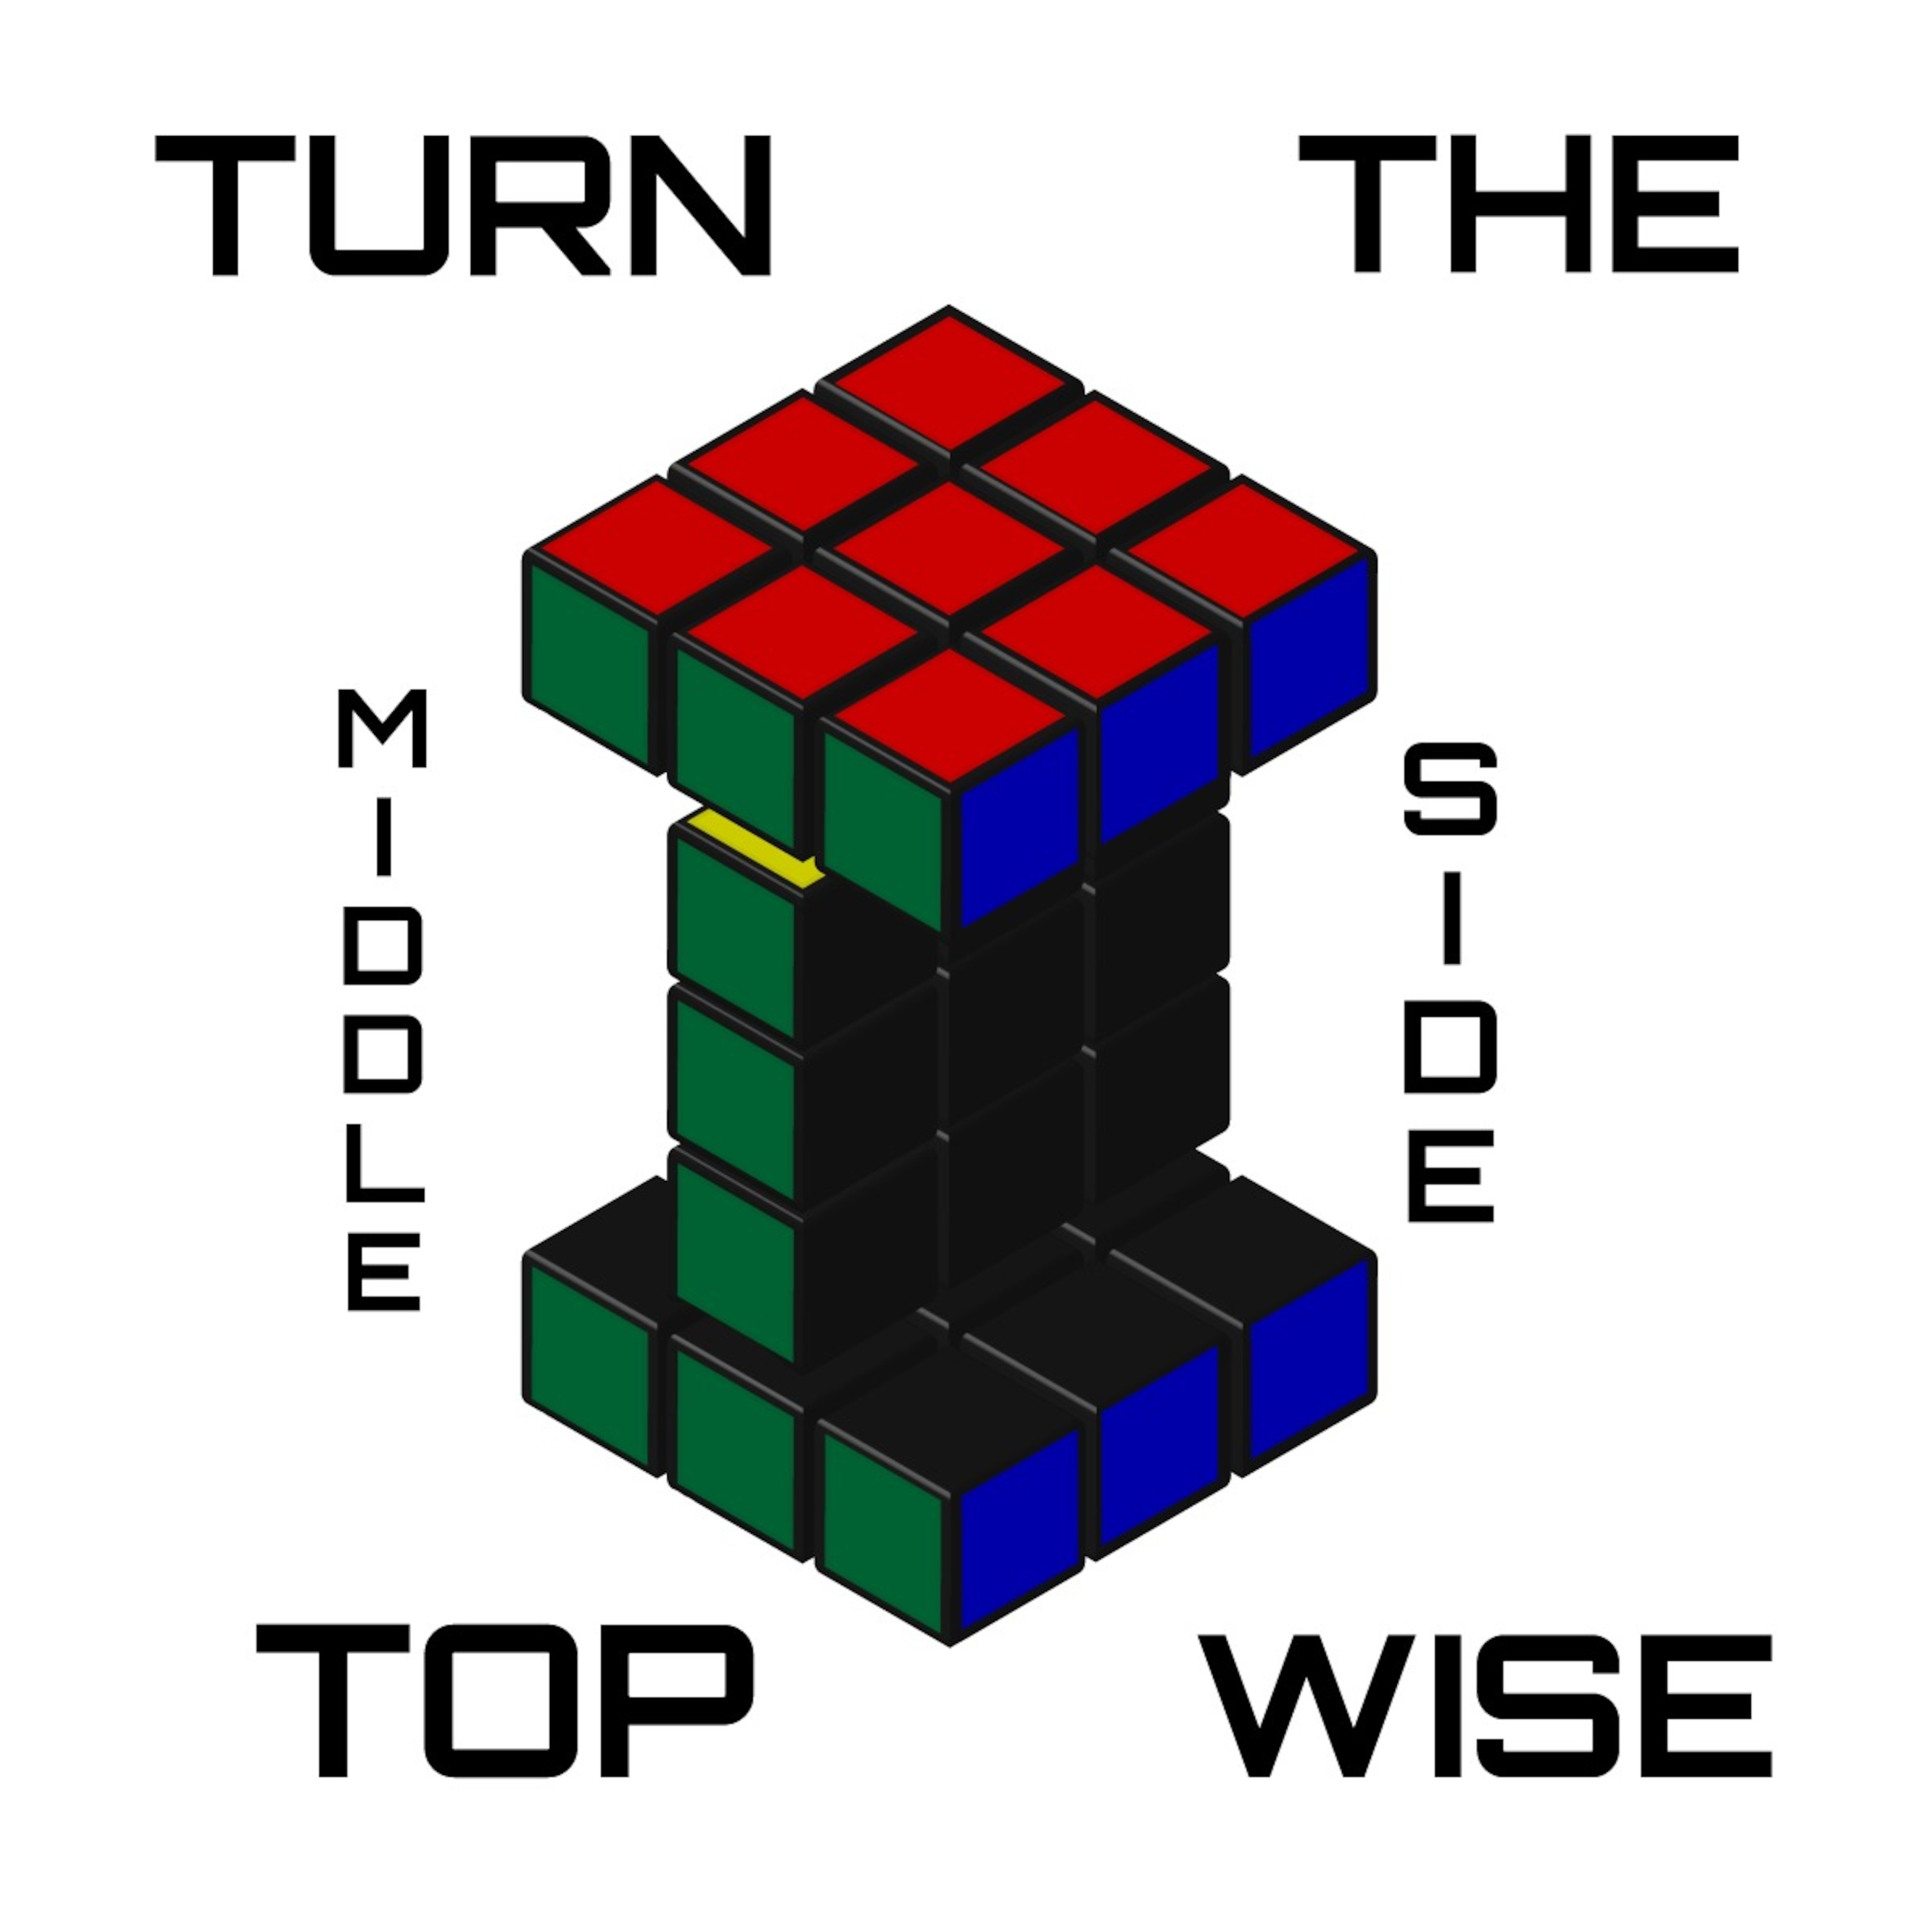 Turn the Middle-Side Top-Wise